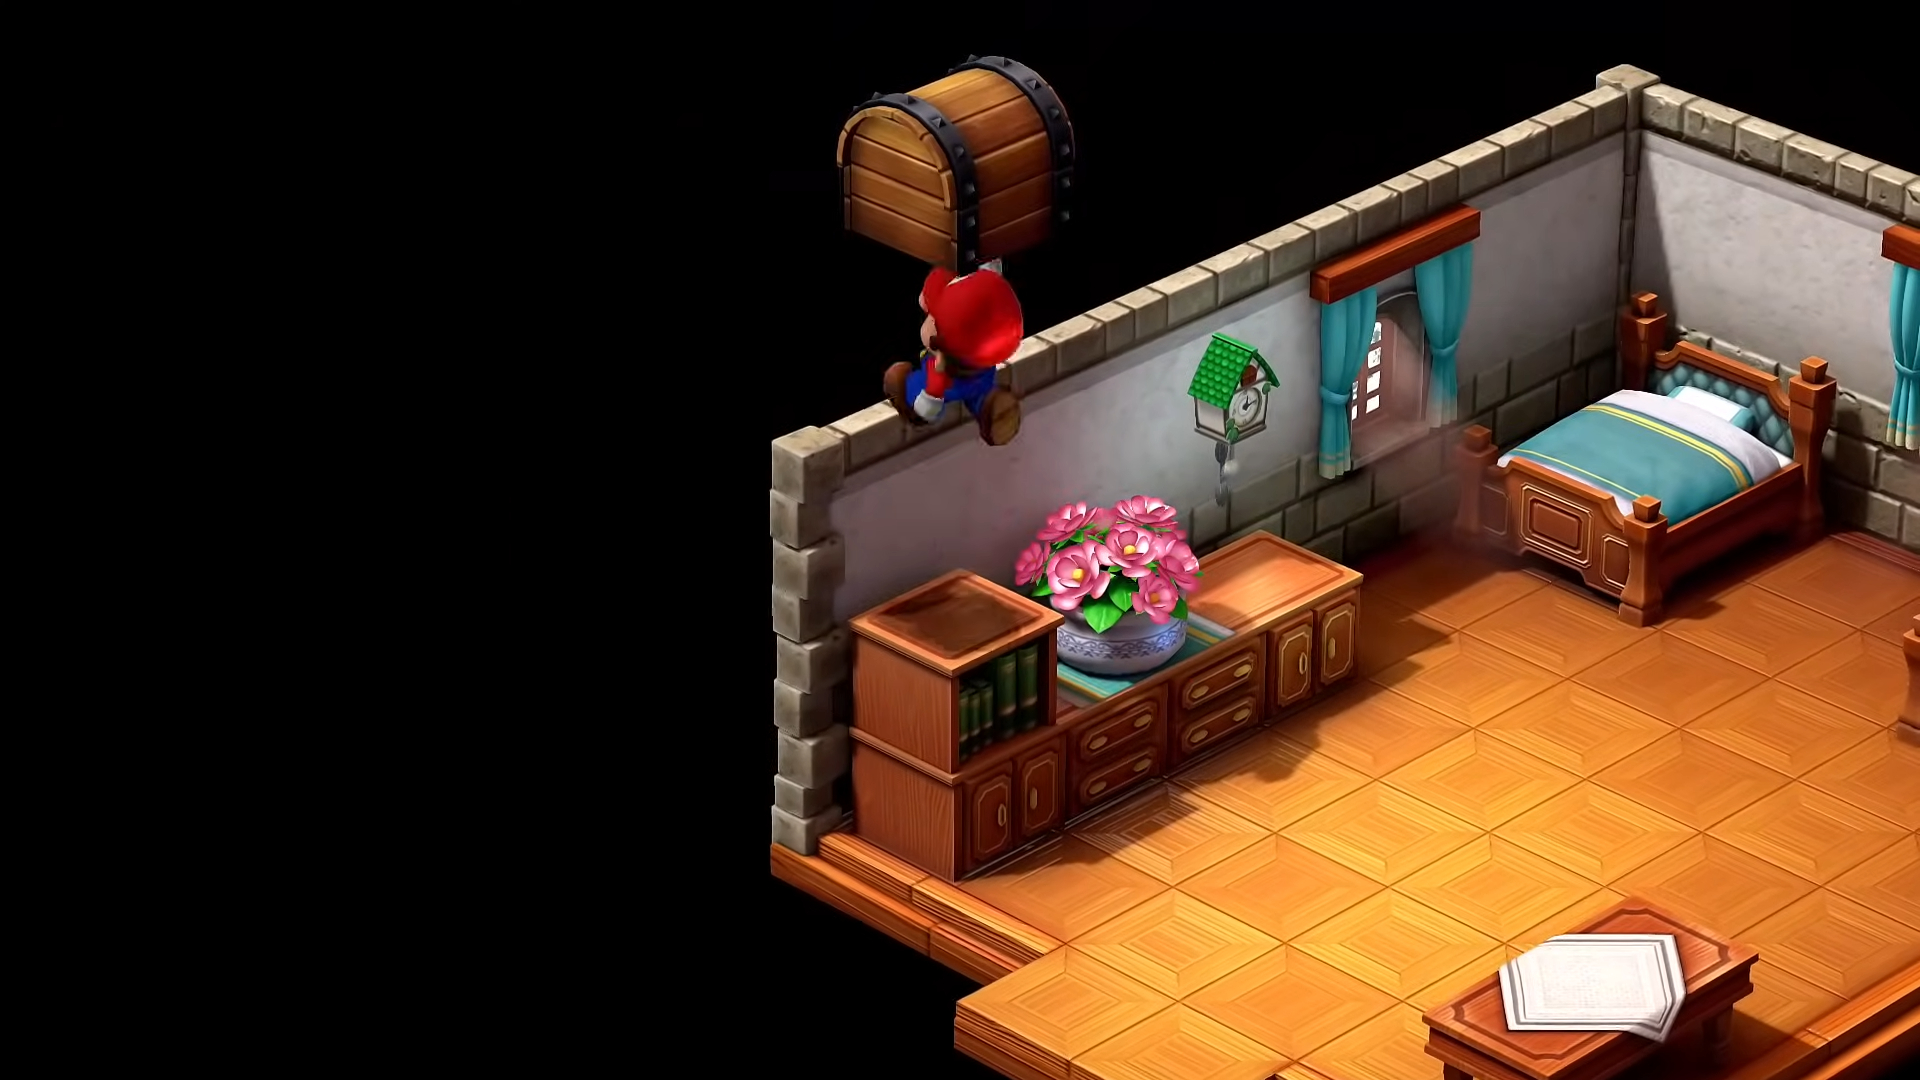 Mario jumping off a cabinet.